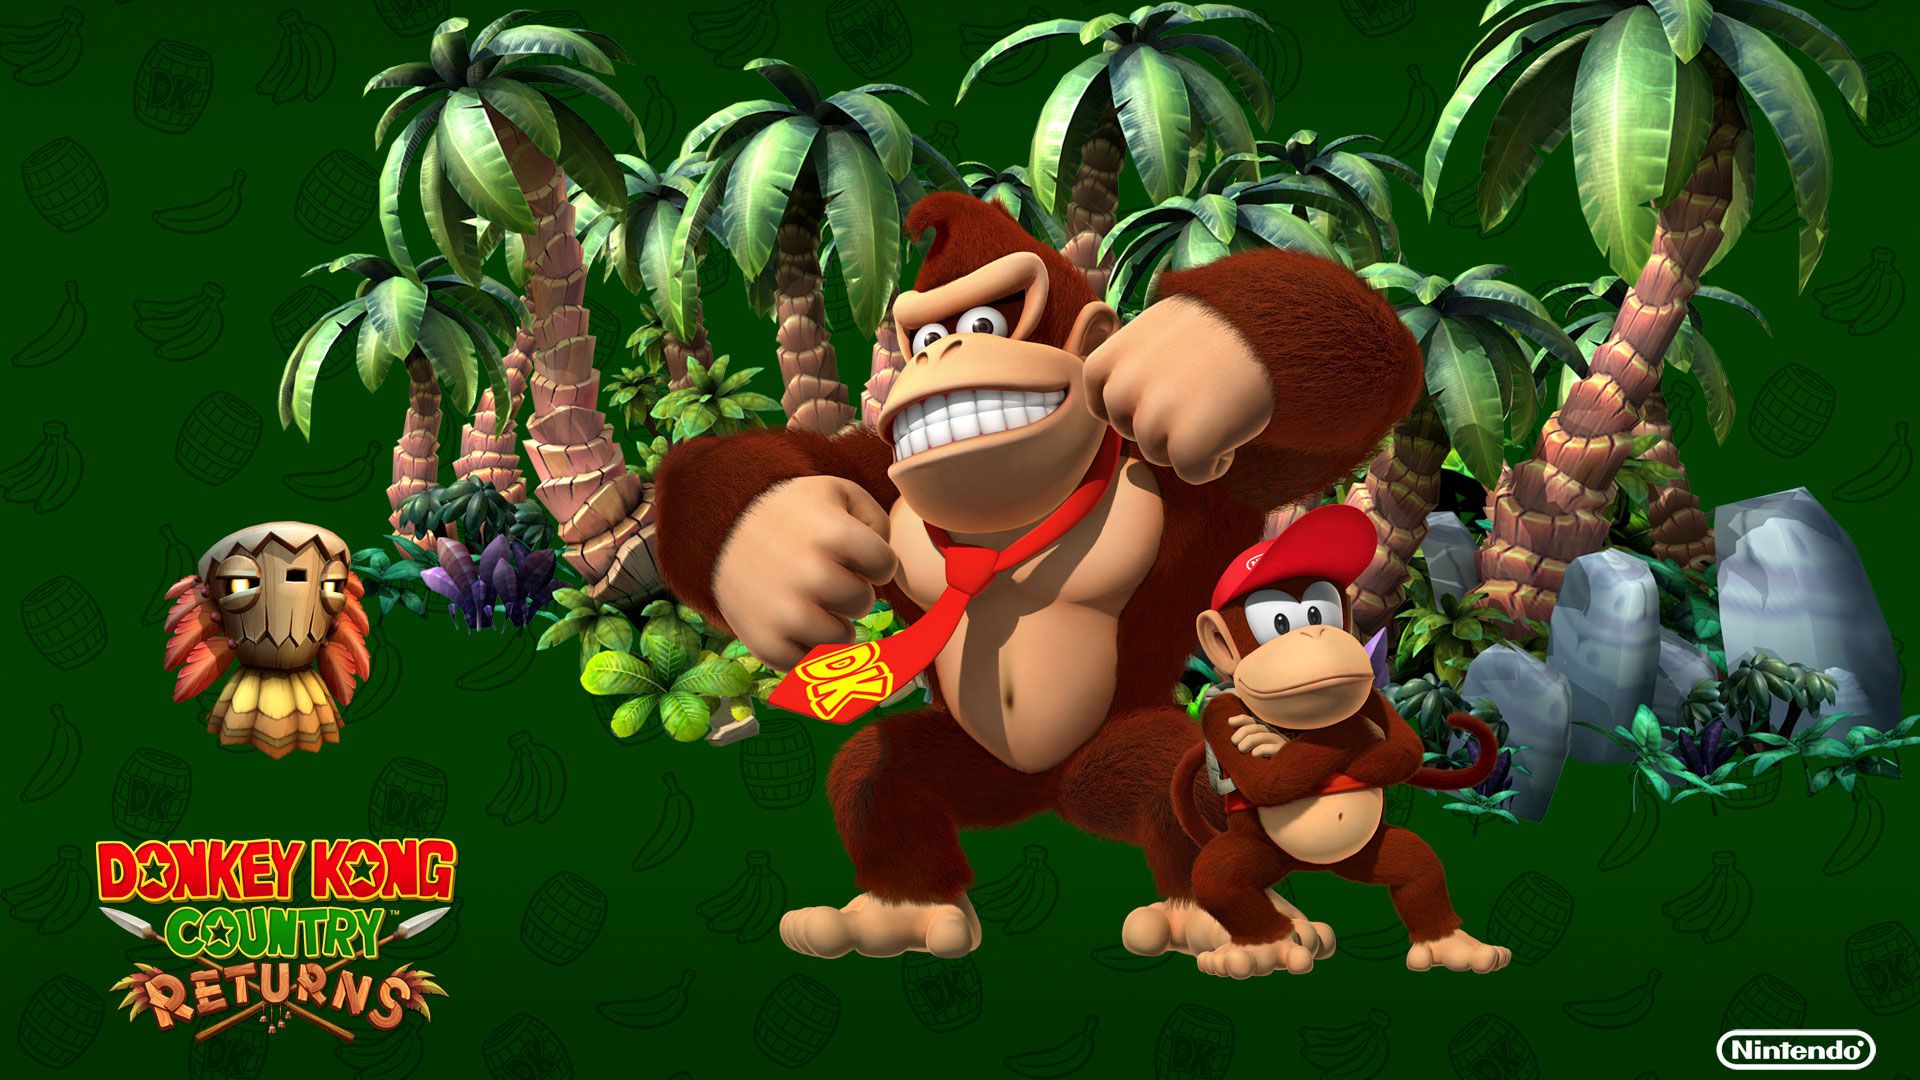 Imagine if instead of a New 3D Donkey Kong Game getting announced